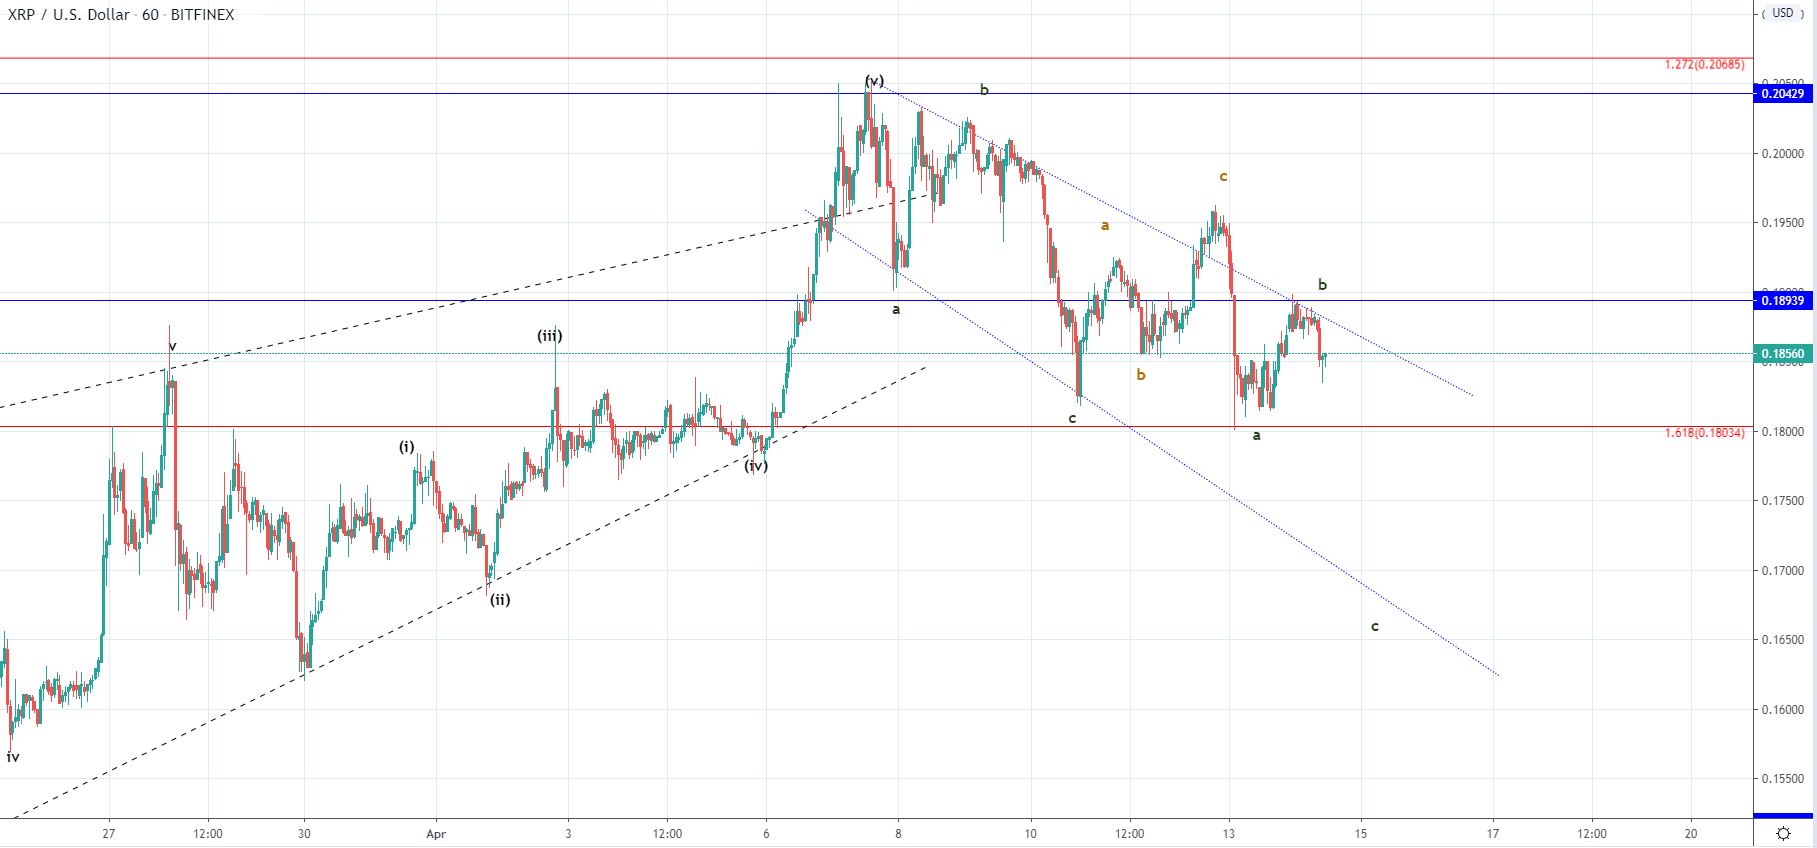 BTC and XRP - Lower lows expected